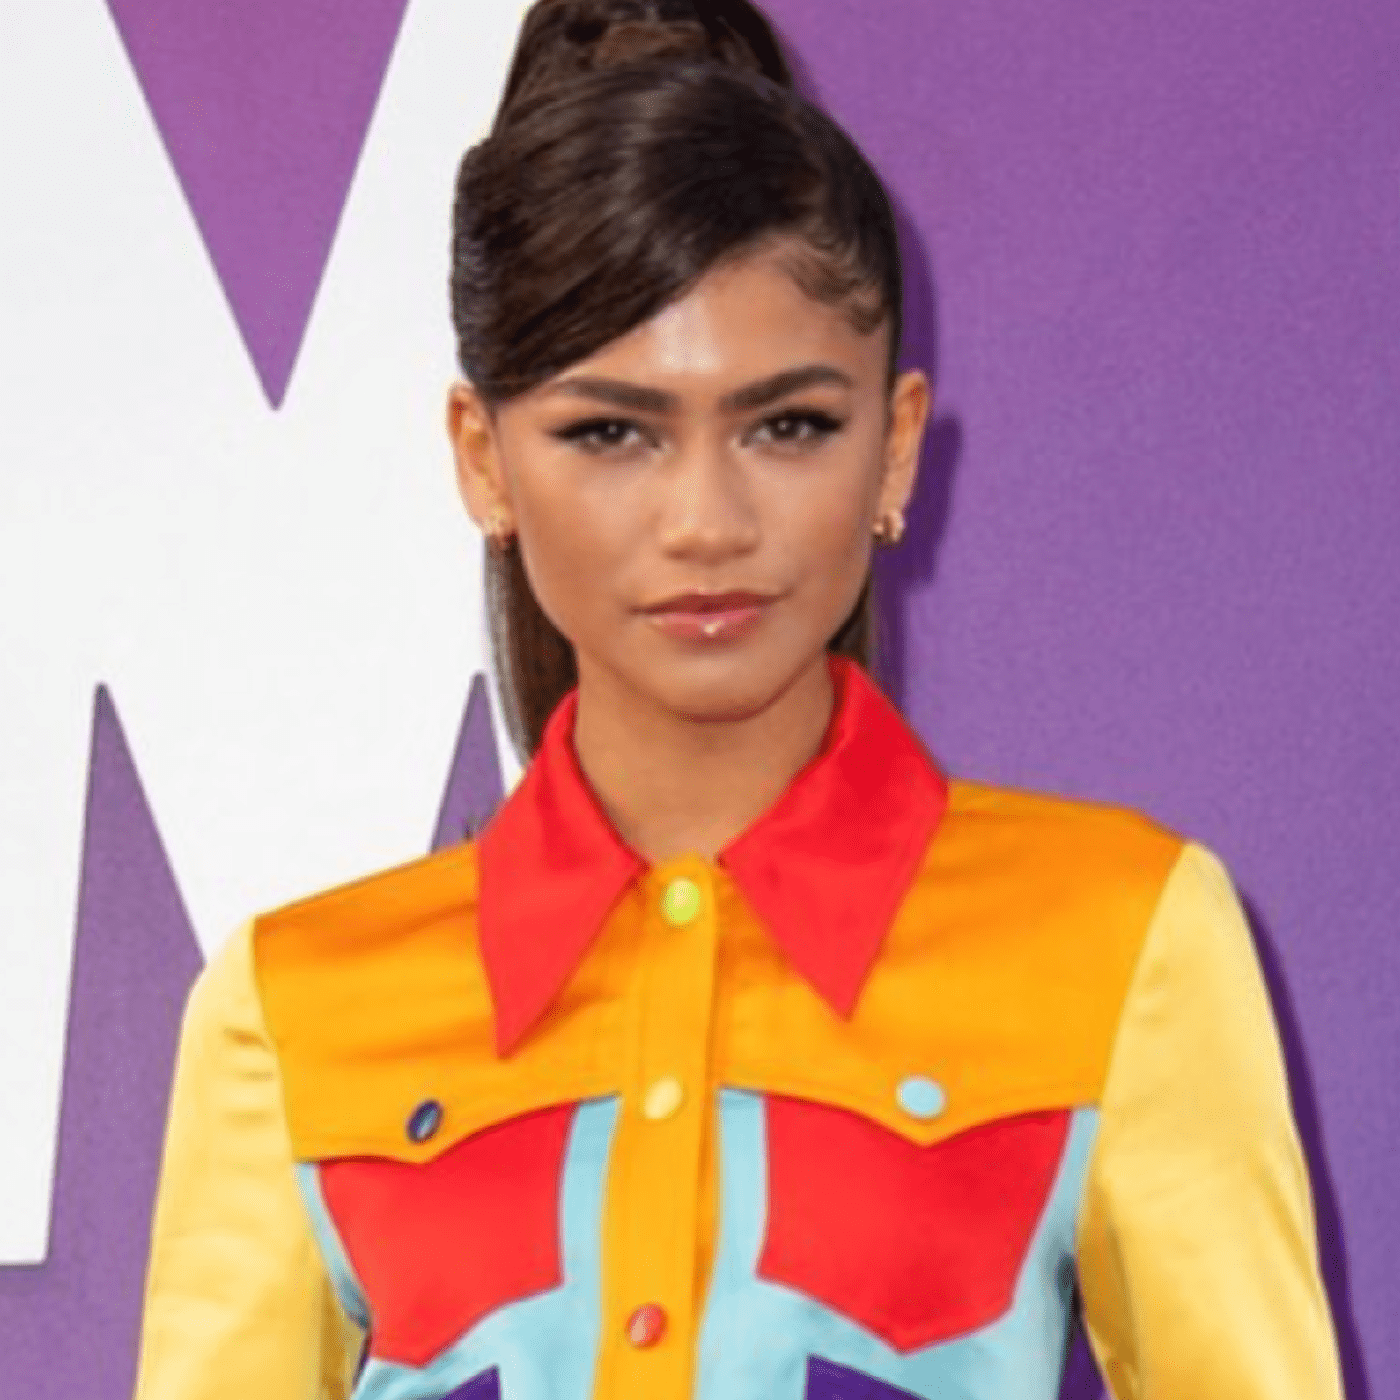 Zendaya stuns in a Lola Bunny inspired outfit for the 'Space Jam 2' premiere!